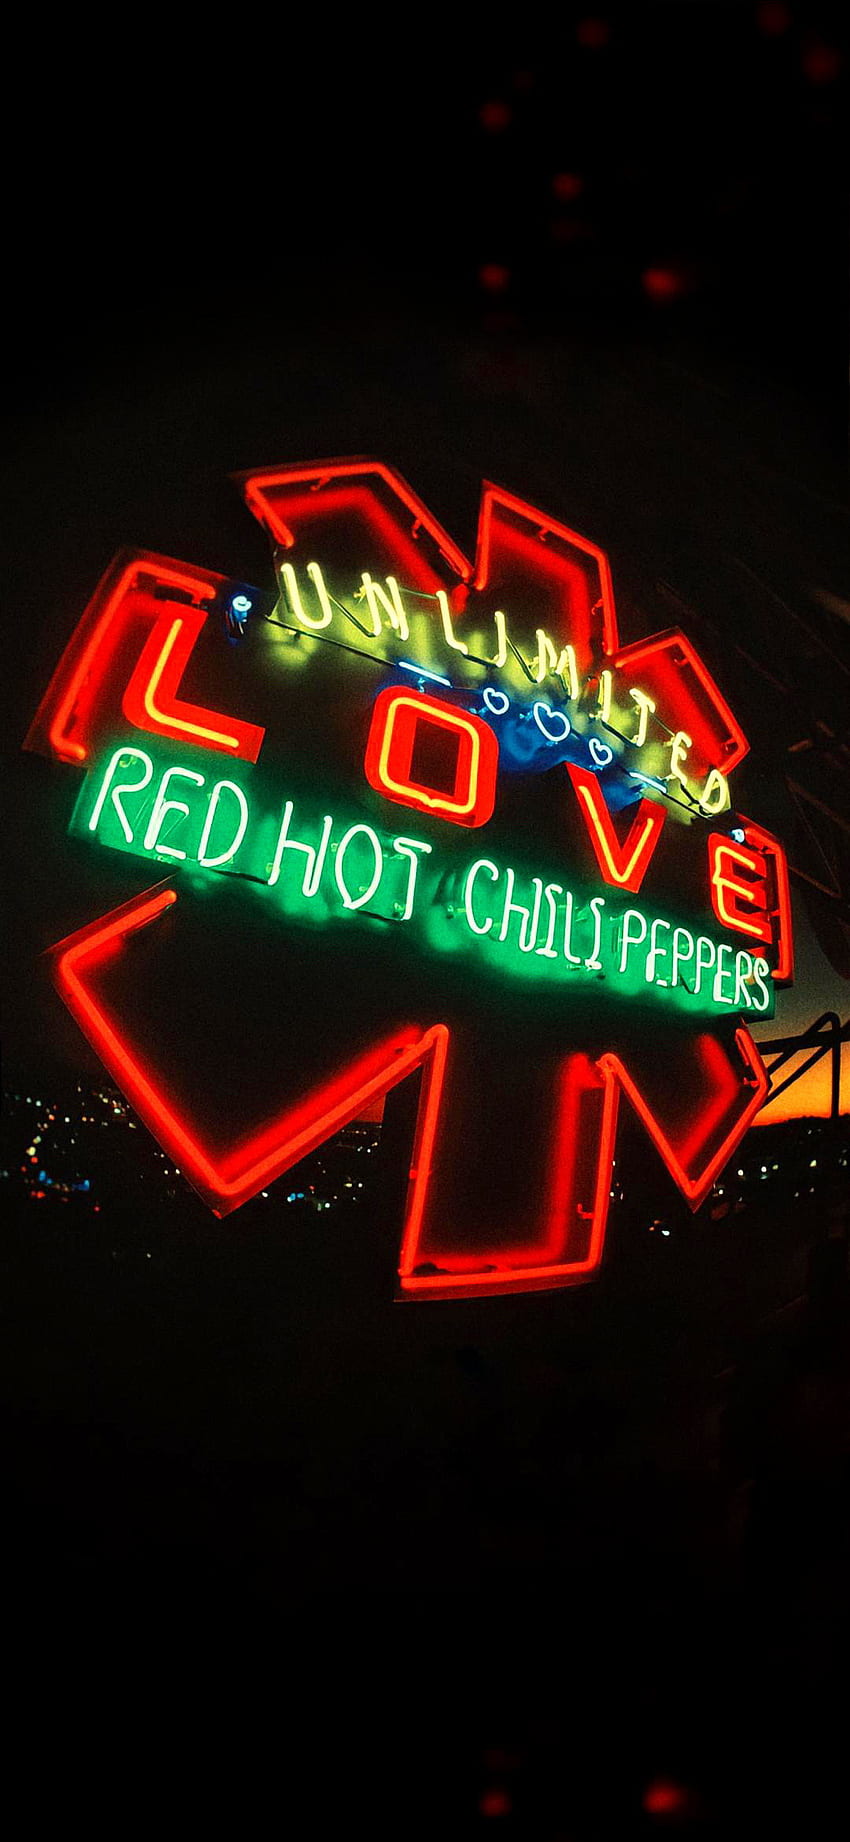 Red hot chili peppers, rock, rhcp HD phone wallpaper